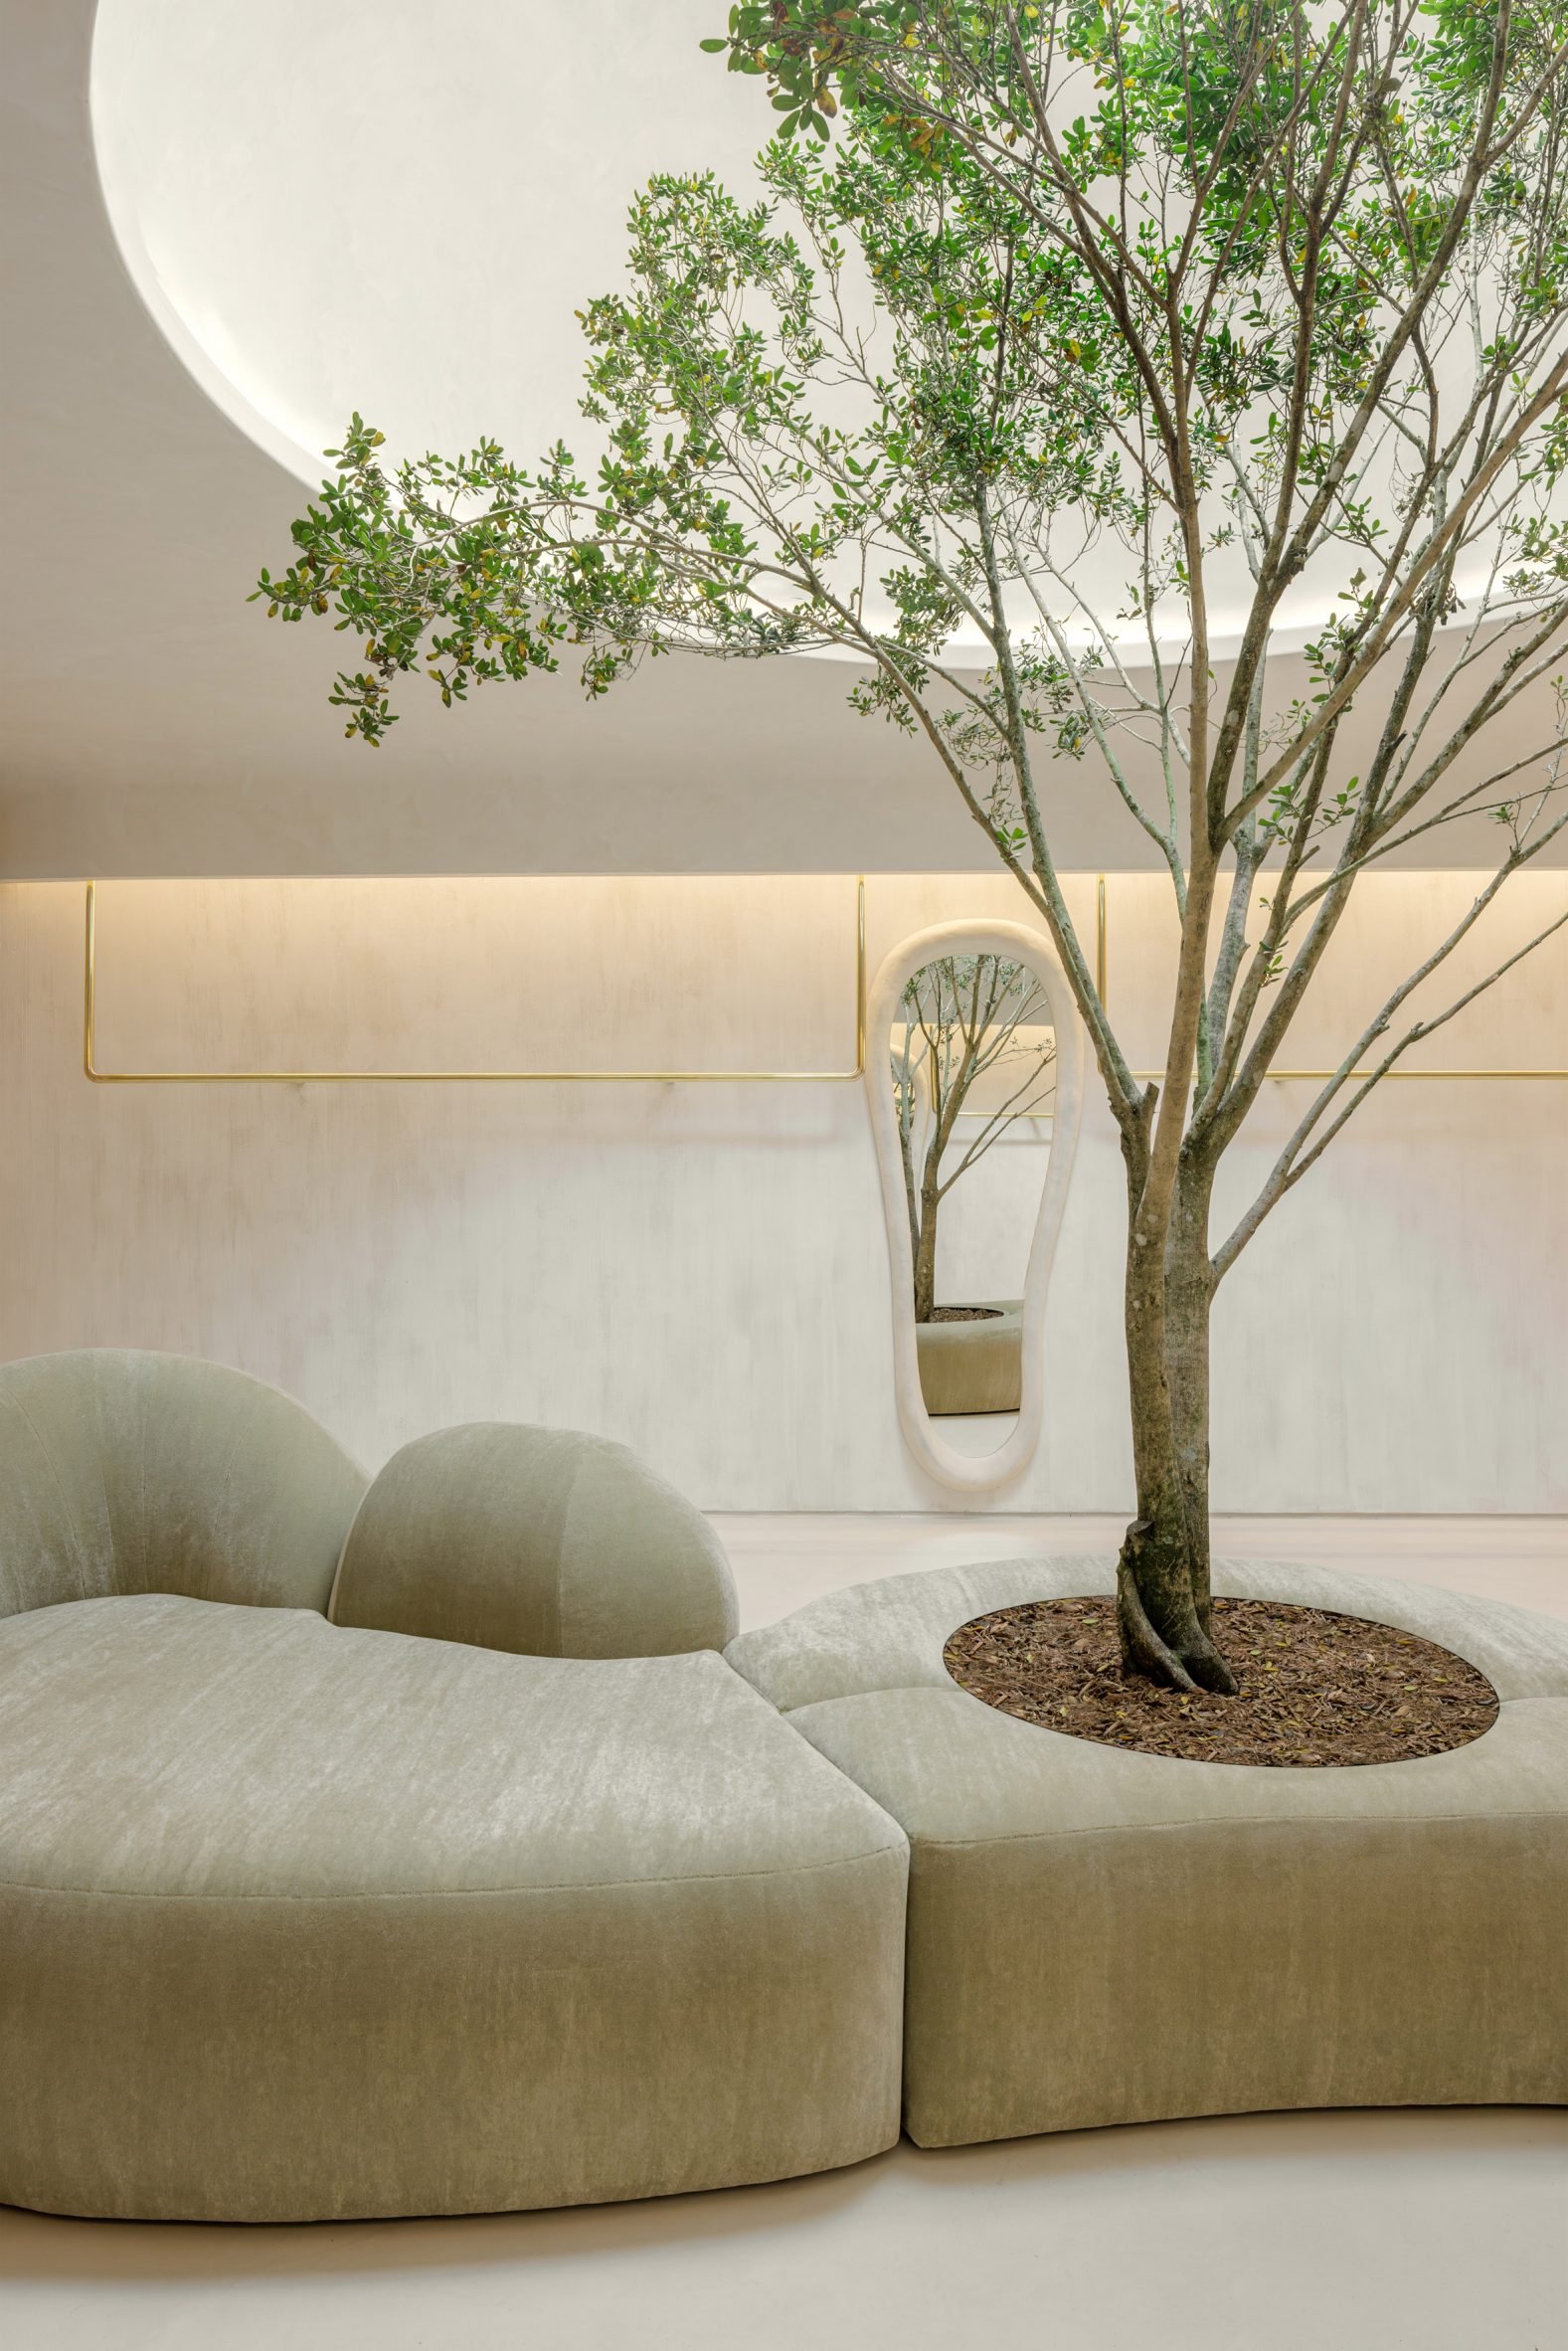 Sofa and tree in front of a plaster wall and brass clothing rails